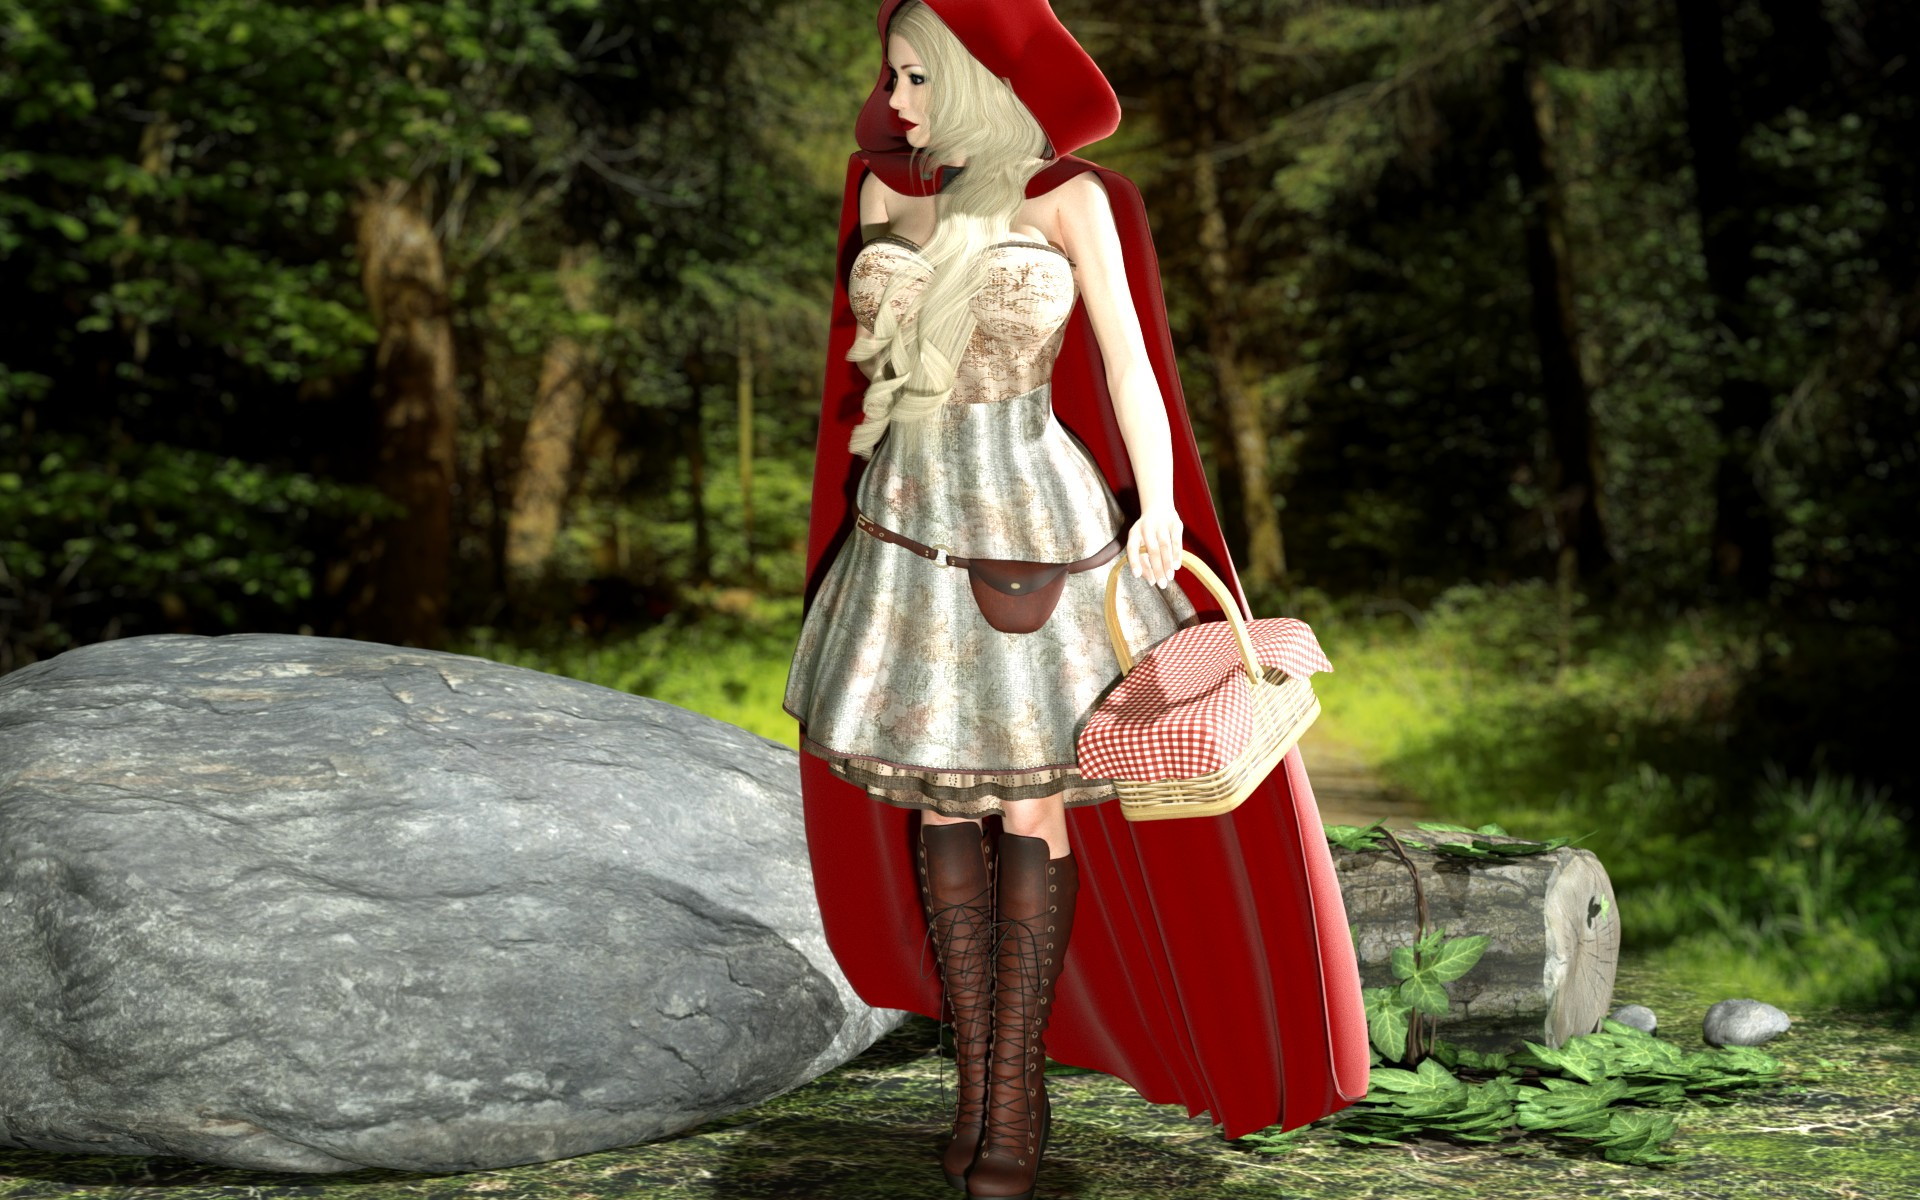 Busty red riding hood